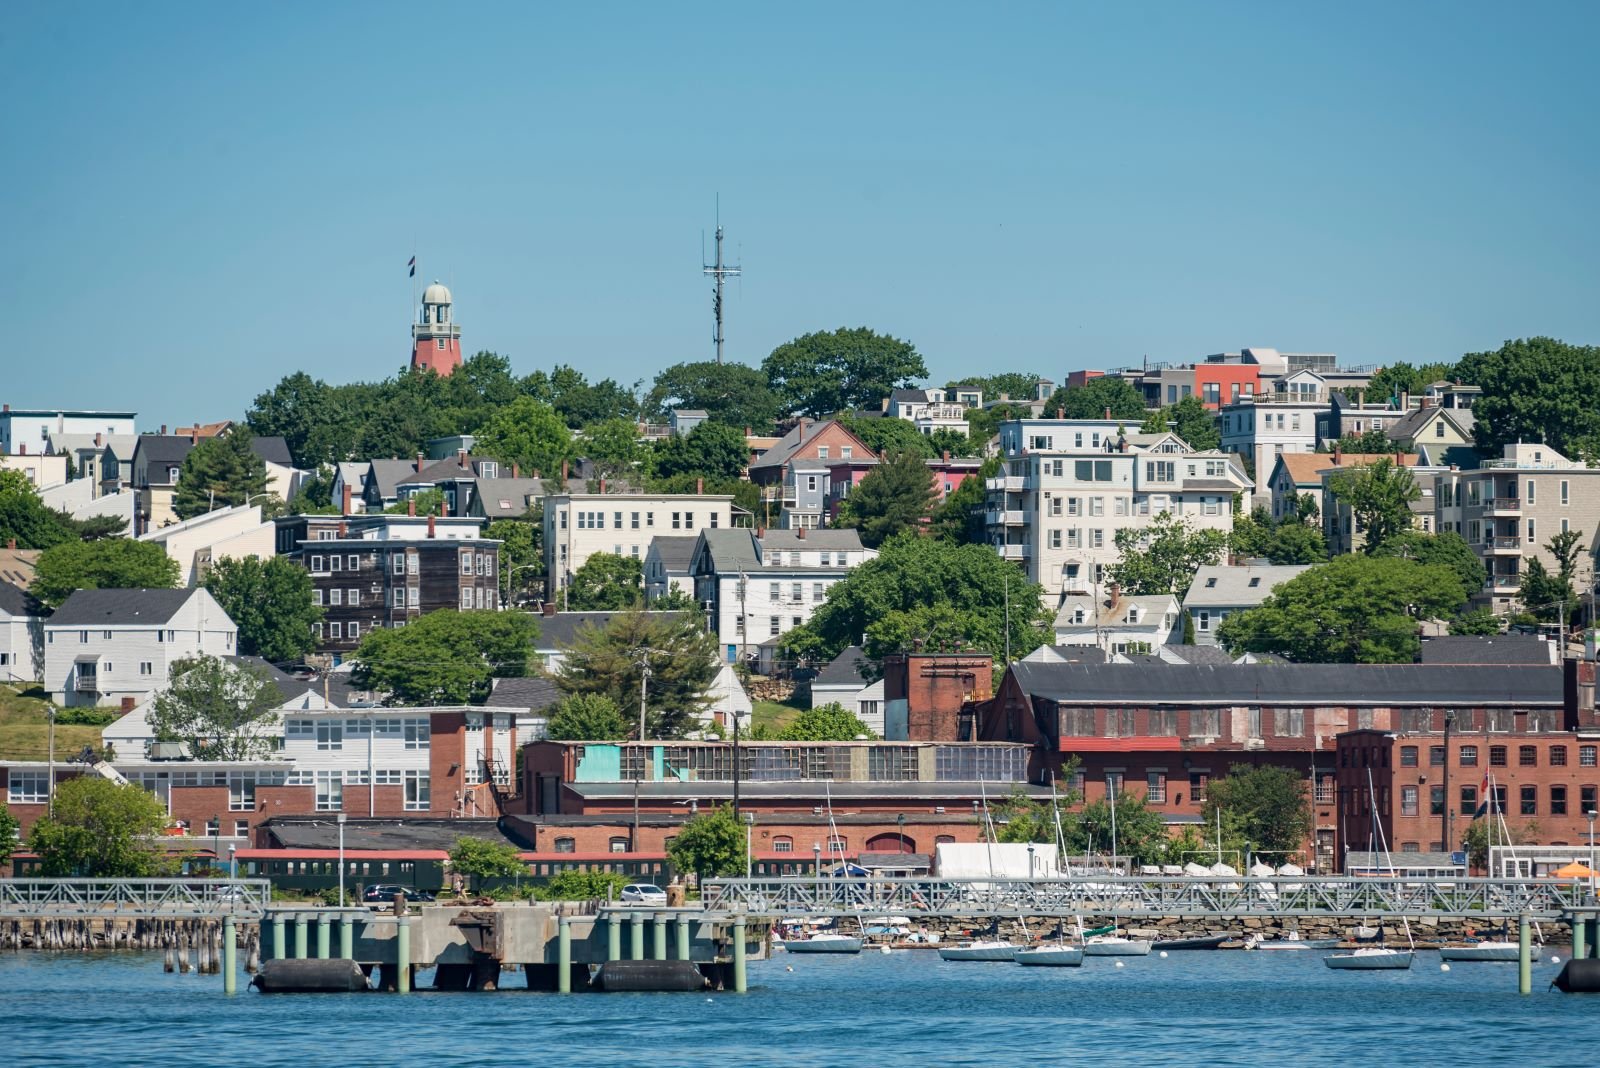 <p>The Portland area has iconic lighthouses, lobster shacks, and a New England harbor ambiance. Seniors can take narrated Casco Bay cruises. They can also visit the Portland Museum of Art or they can drive up the coast to see Acadia National Park.</p>